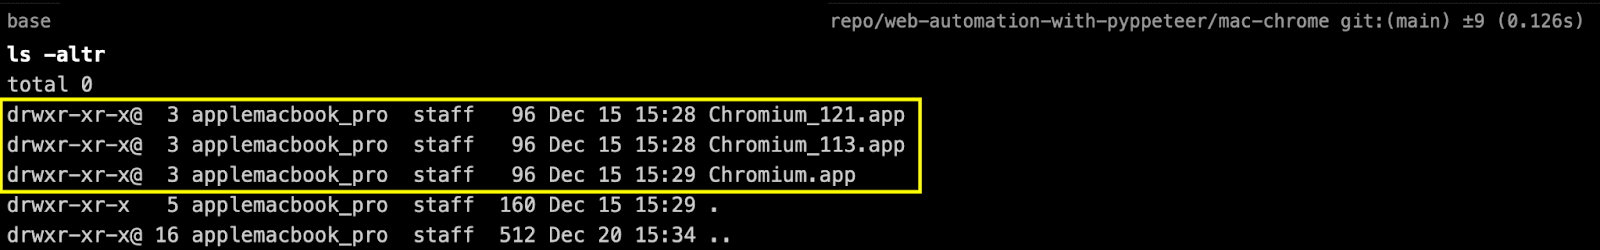 set to run Pyppeteer with the different versions of the Chromium browser